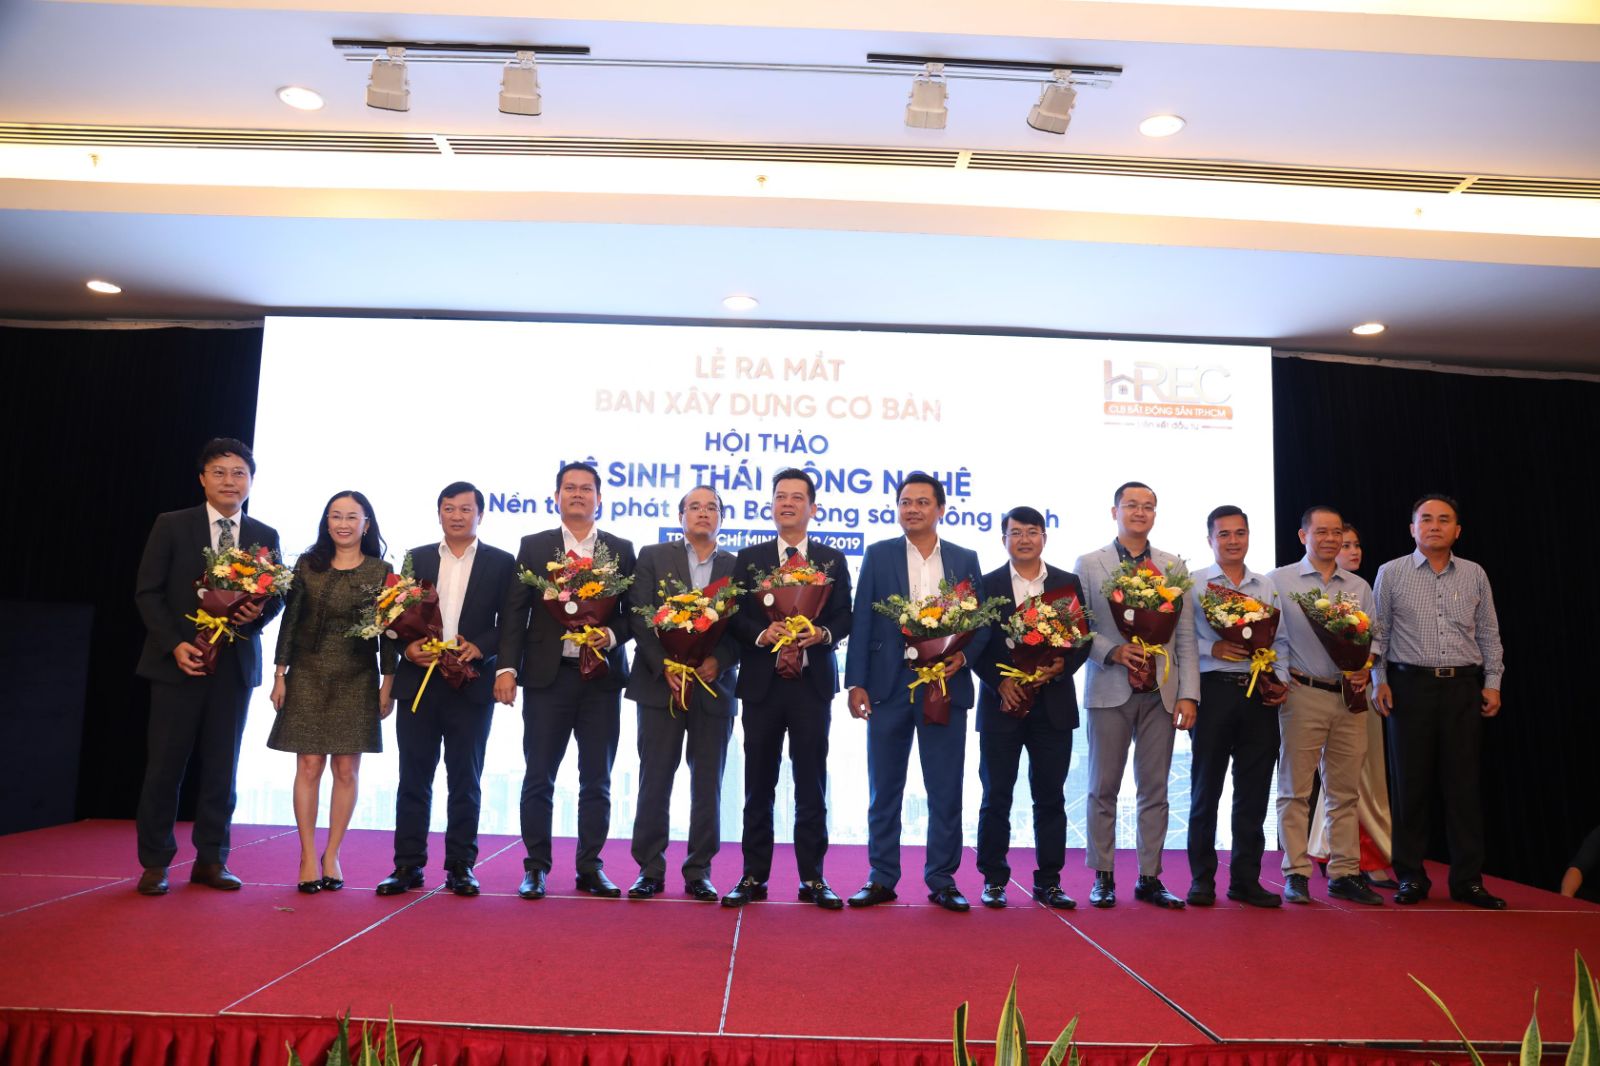 Sao Bac Dau introduces a comprehensive set of solutions for Smart Urban Area at the Conference “Technology Ecosystem - Smart Real Estate Development Platform”.